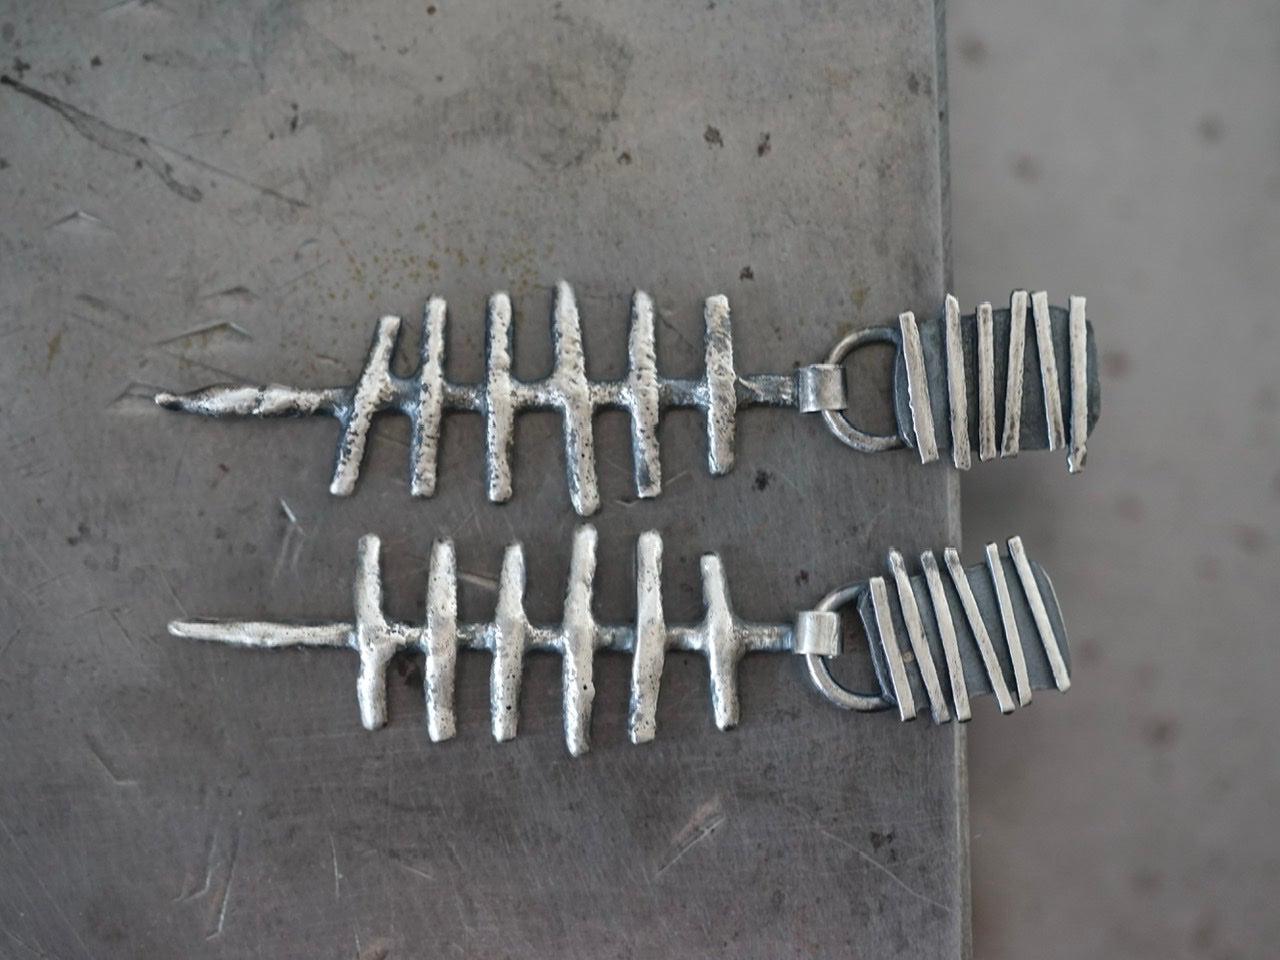 Remnants/ withered series, large skeletal sterling silver earrings